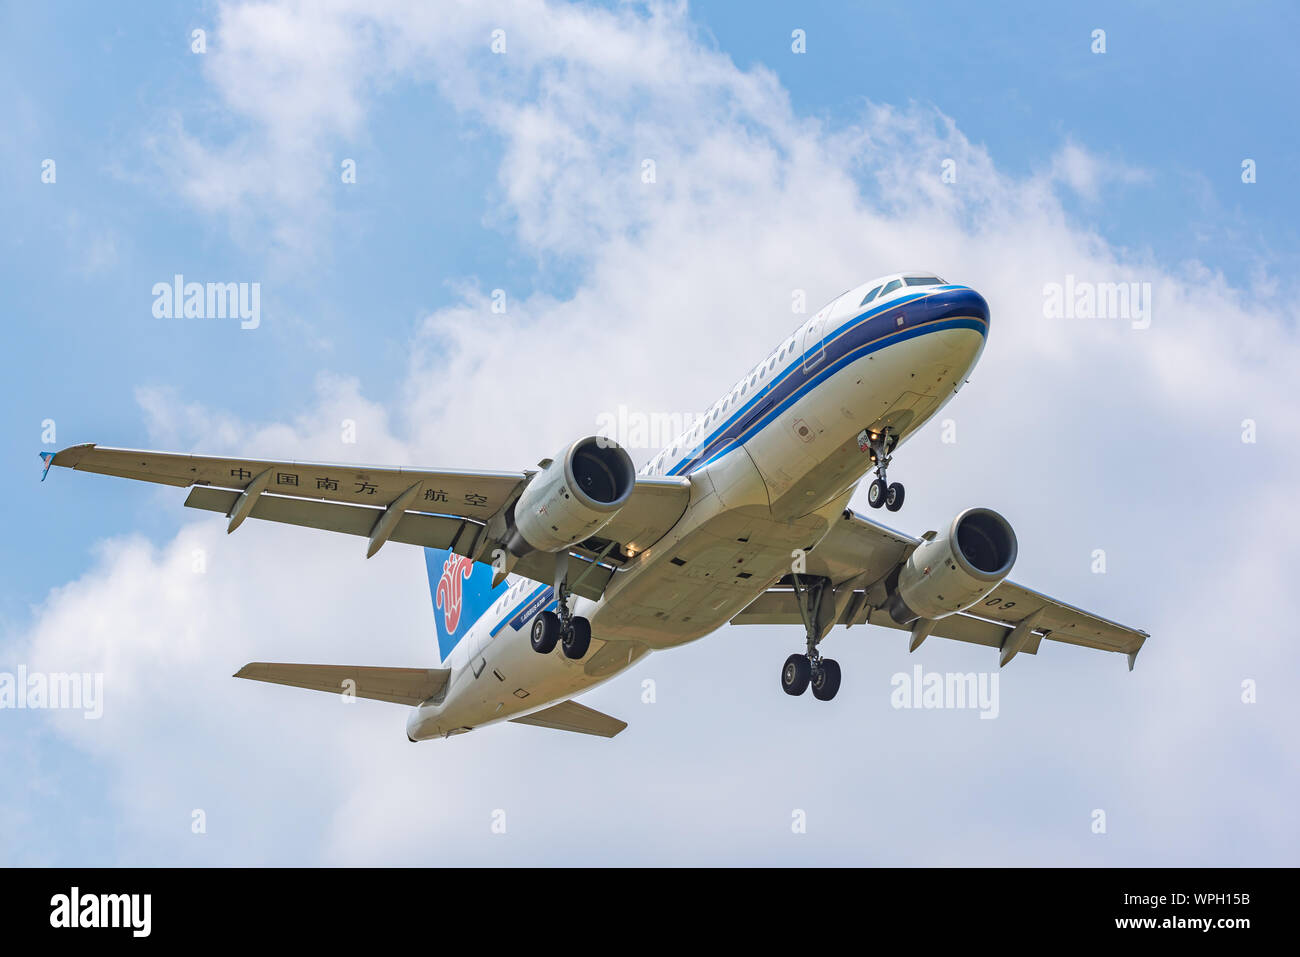 Chengdu airport, Sichuan province, China - August 28, 2019 : China Southern airlines Airbus A319 commercial airplane against sky Stock Photo